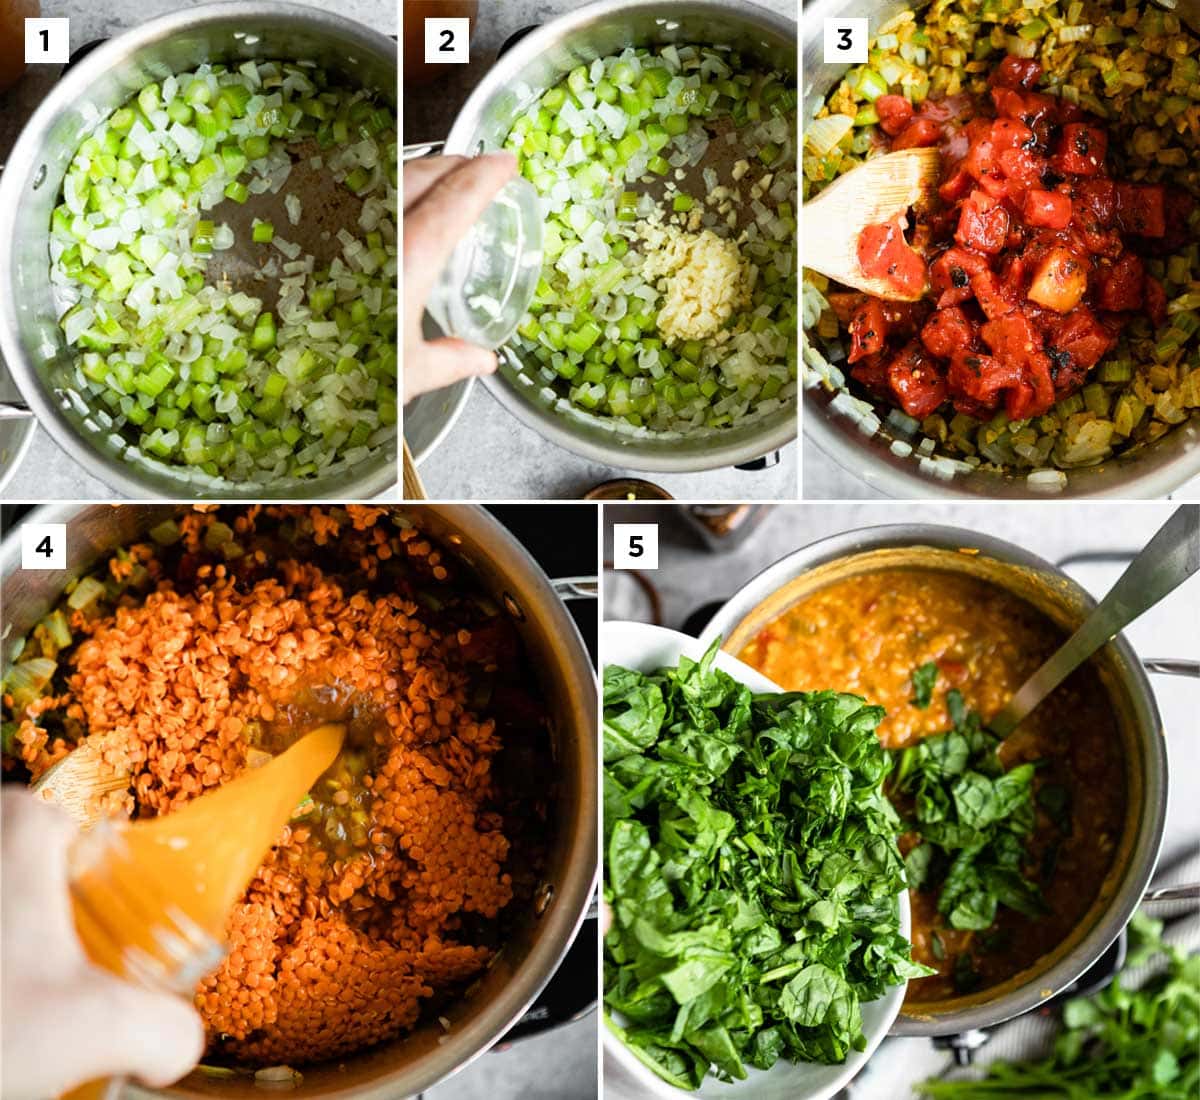 5 photos showing step by step instructions for making lentil soup: sauté, stir in remaining ingredients, add vegetable stock, then after the soup has simmered, add in spinach.